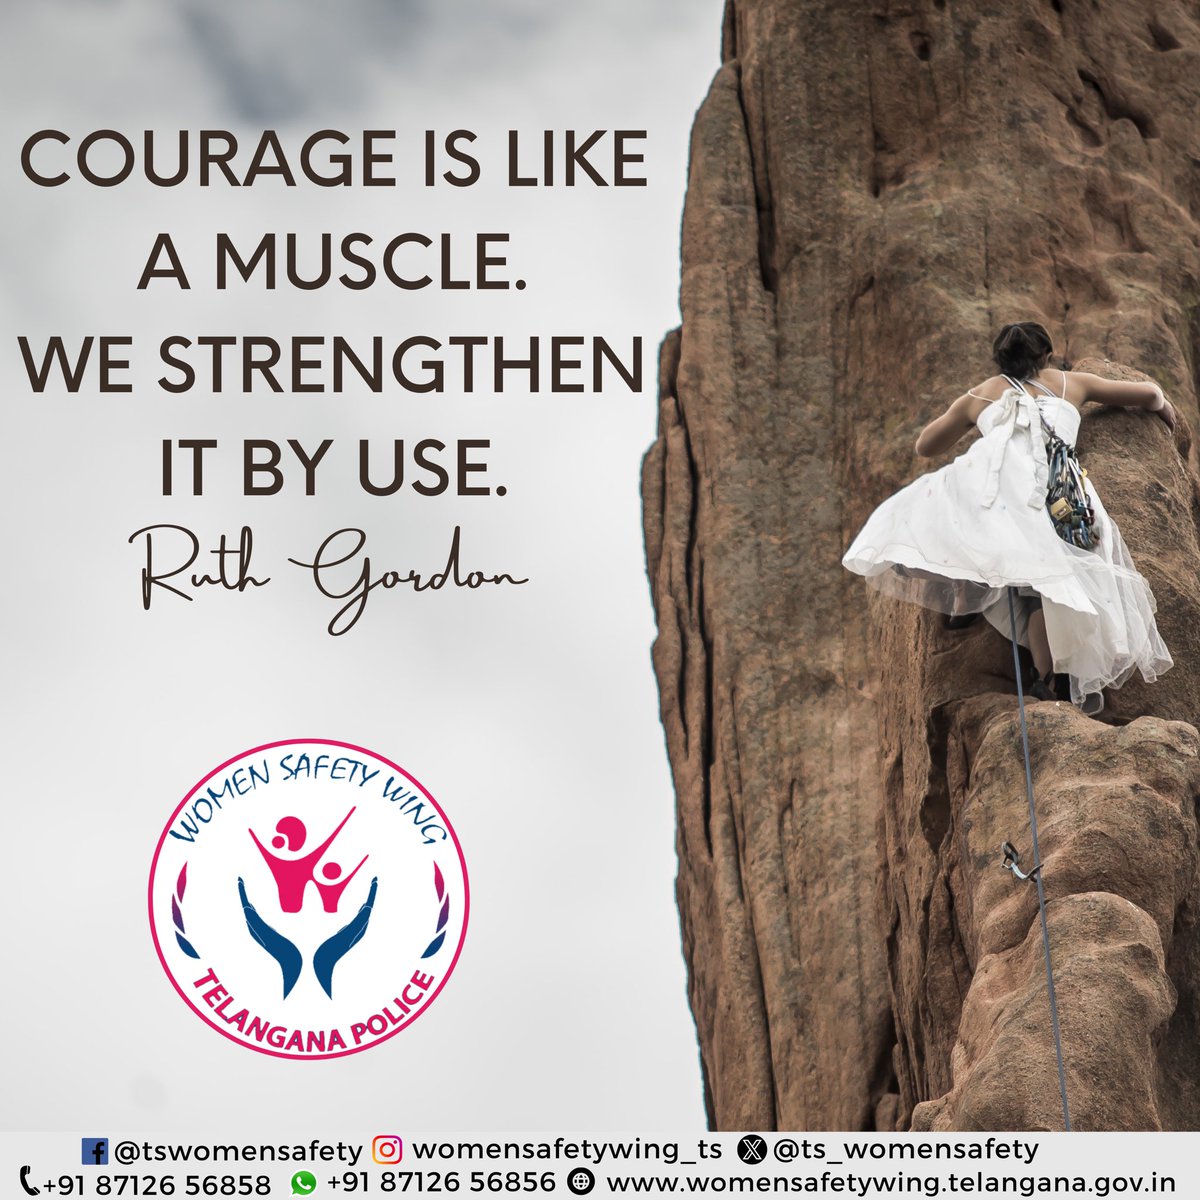 Remember we are always with you! #Monday #MondayMotivation #MondayMorning #Courage #Motivation #WomenSafetyWing